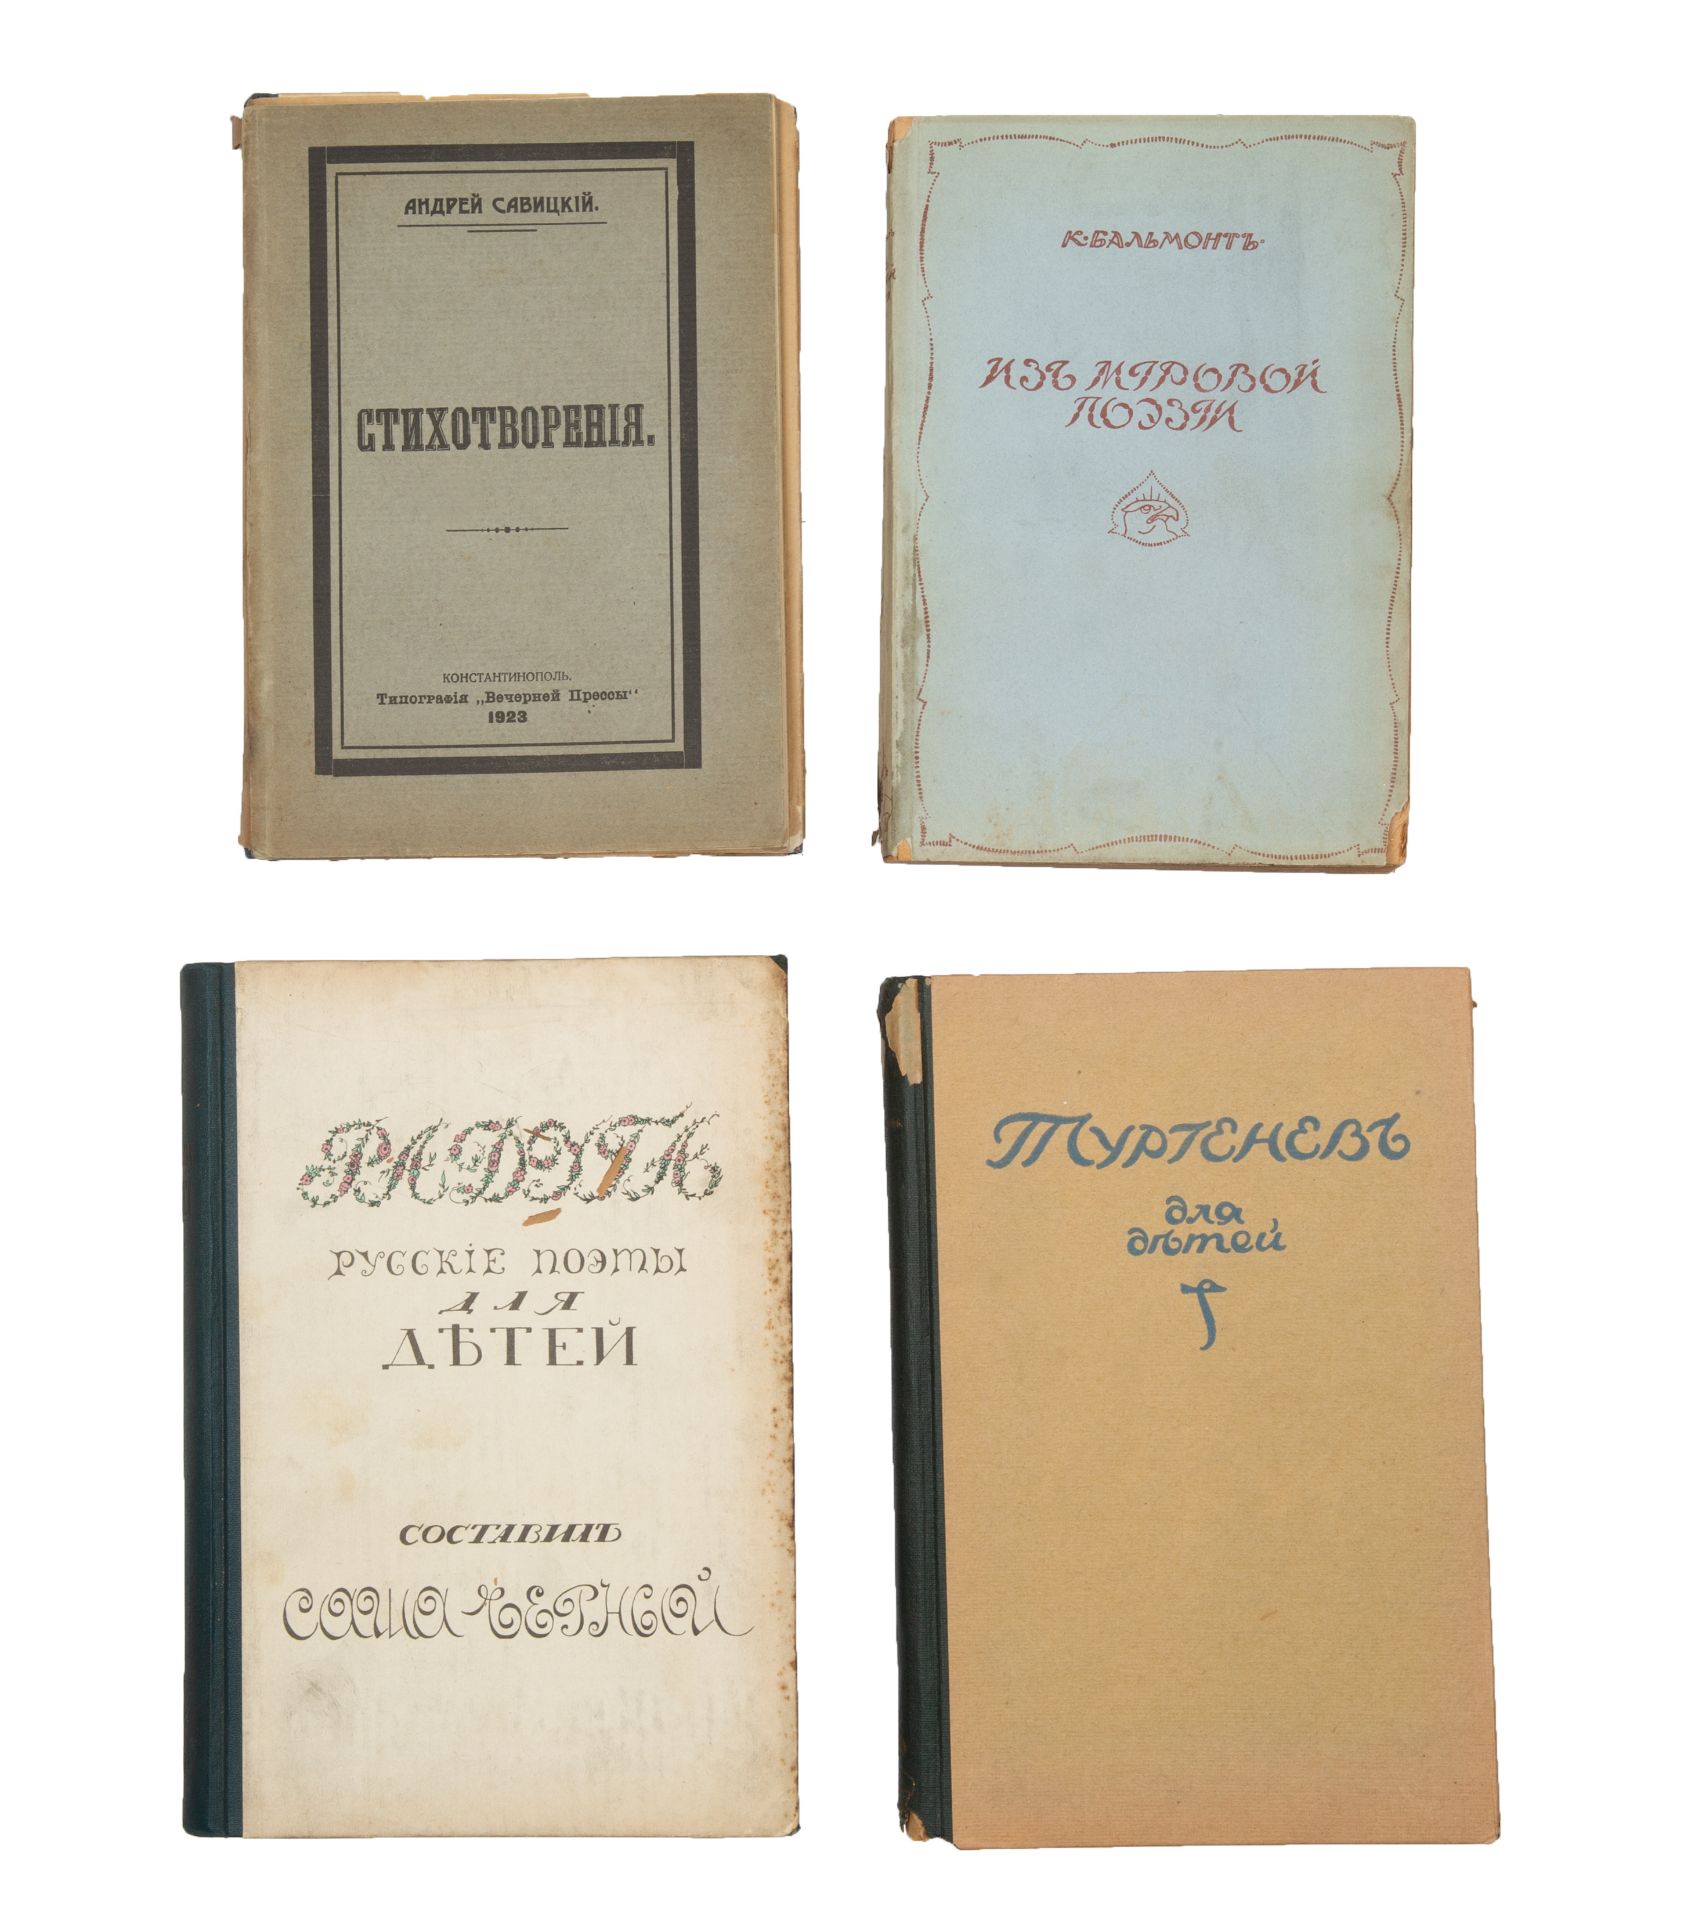 A GROUP OF 21 RARE RUSSIAN BOOKS, MOST PUBLISHED IN BERLIN, CONSTANTINOPLE, EARLY 1920S - Image 4 of 6